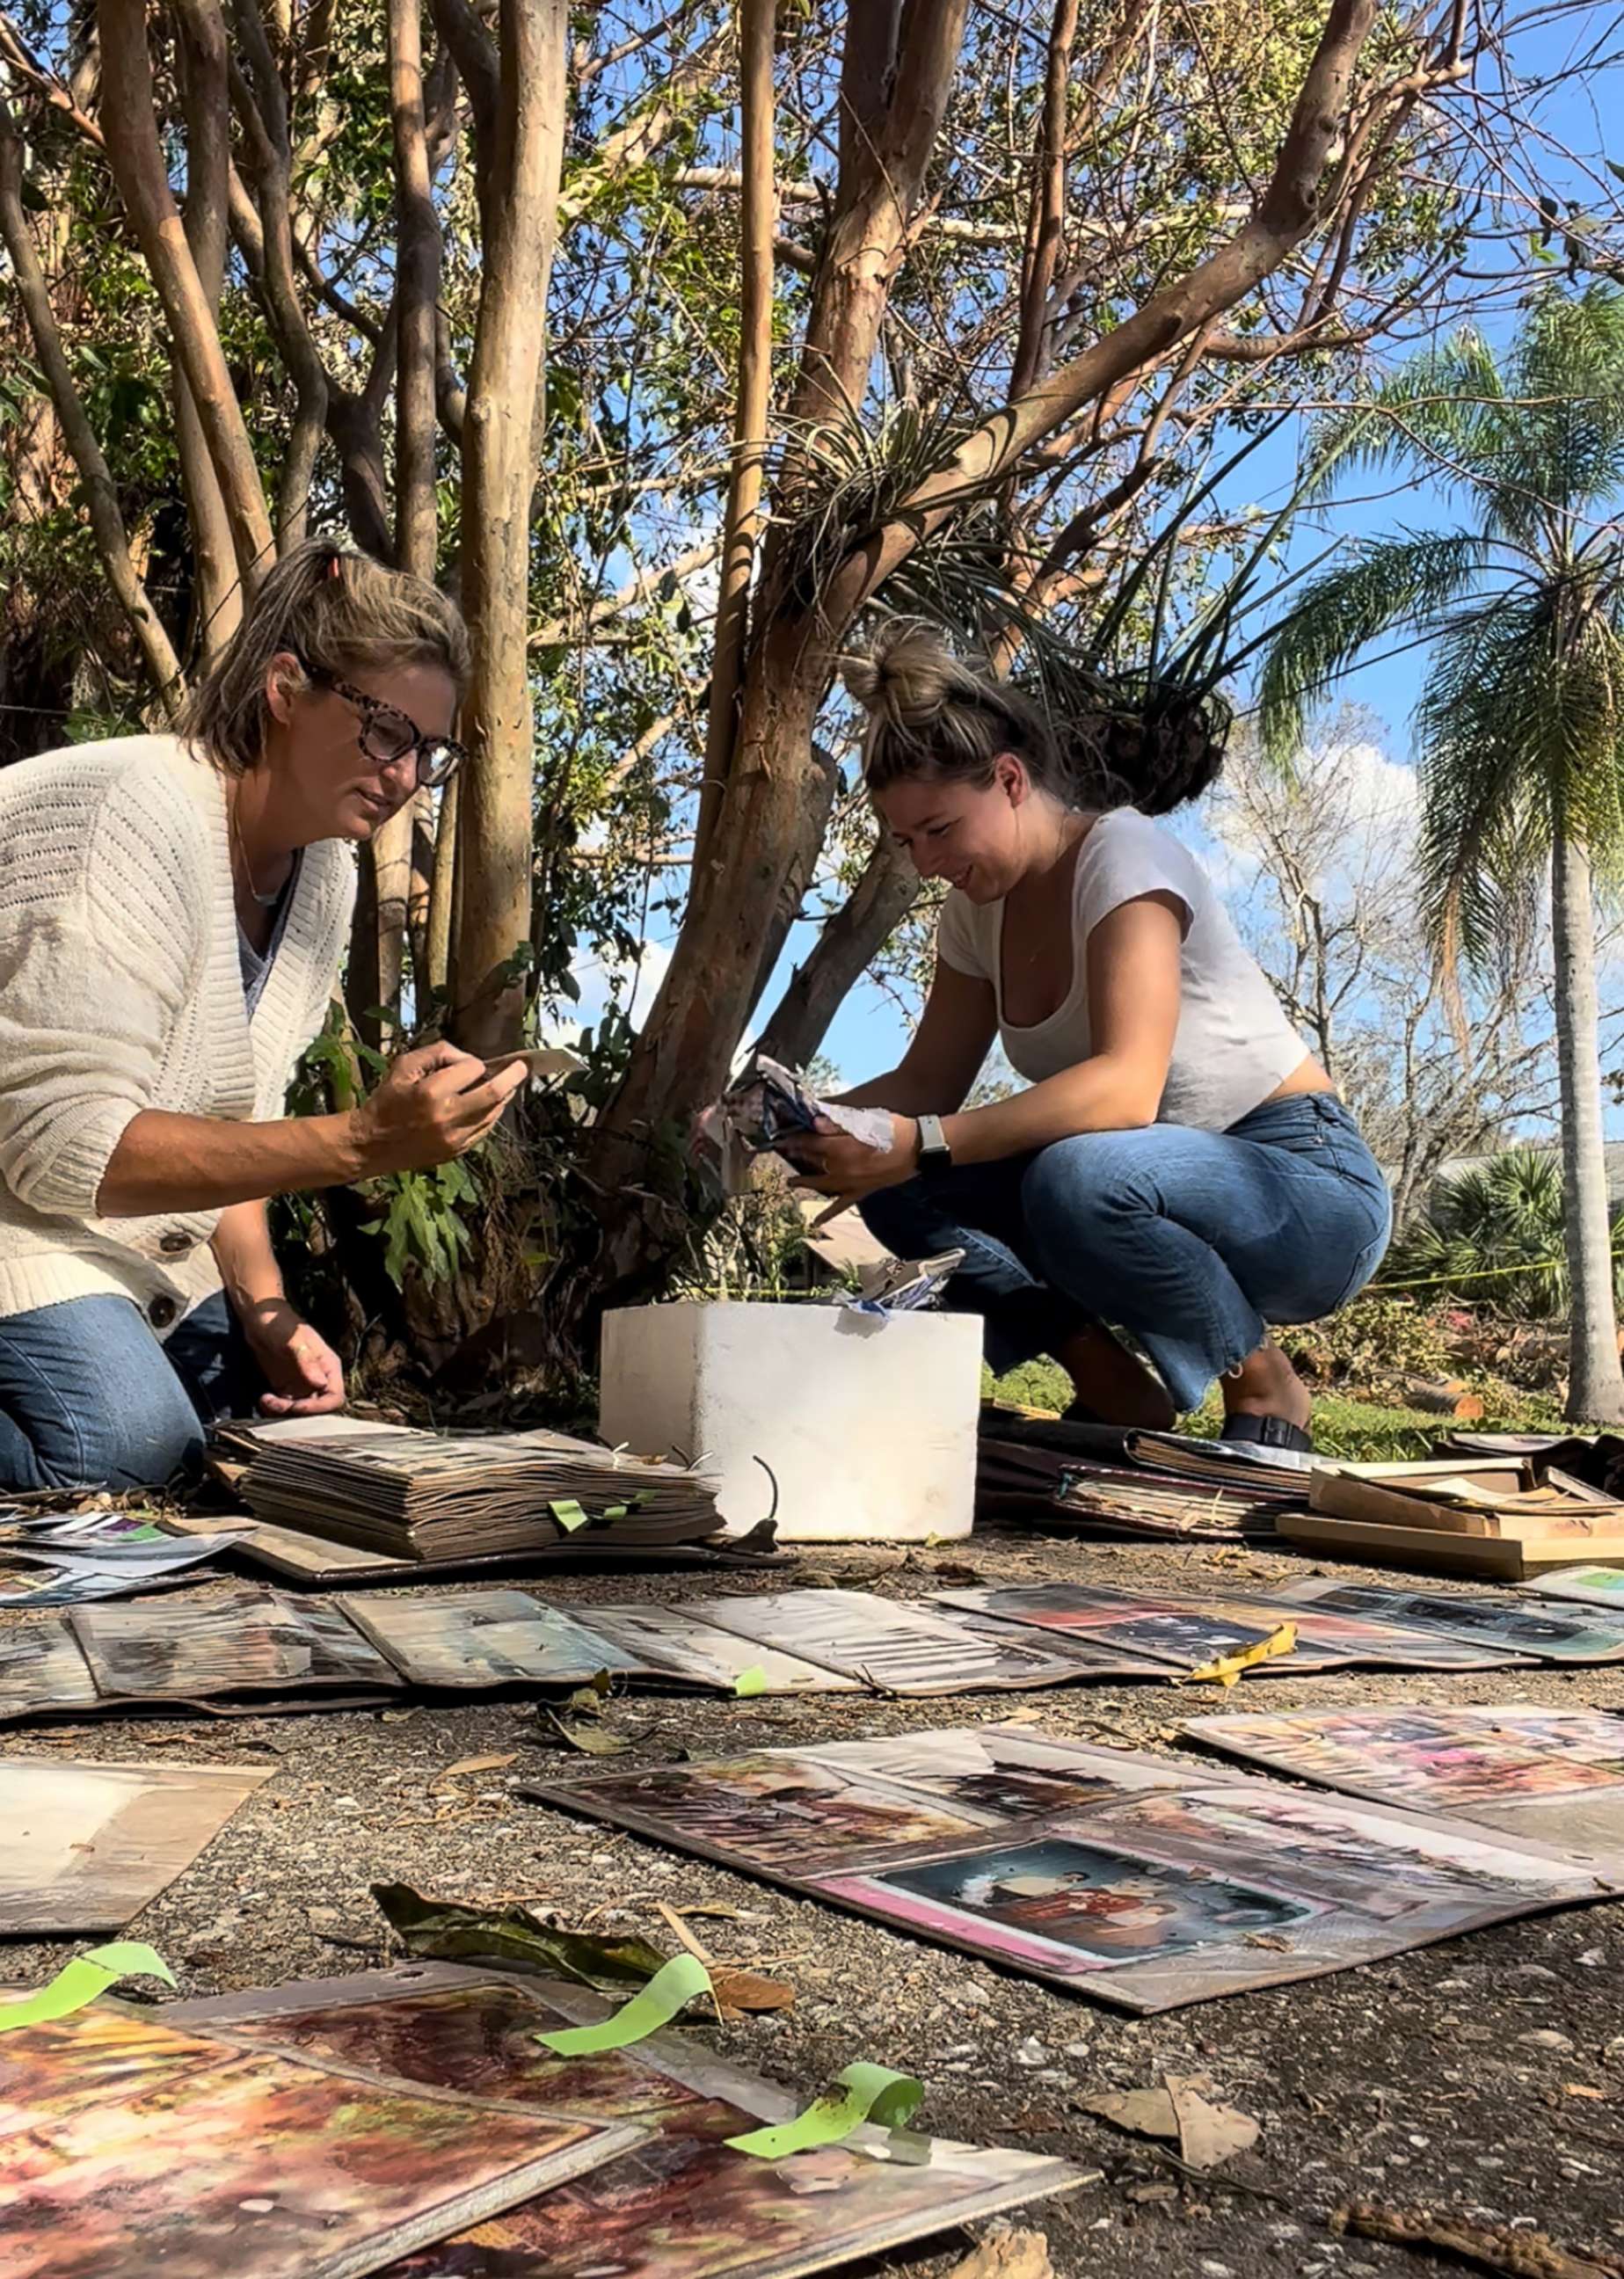 PHOTO: Krista Kowalczyk, owner of Impressions Photography, works with her assistant Maddie Briggs to recover photographs in Fort Myers, Florida, after Hurricane Ian.